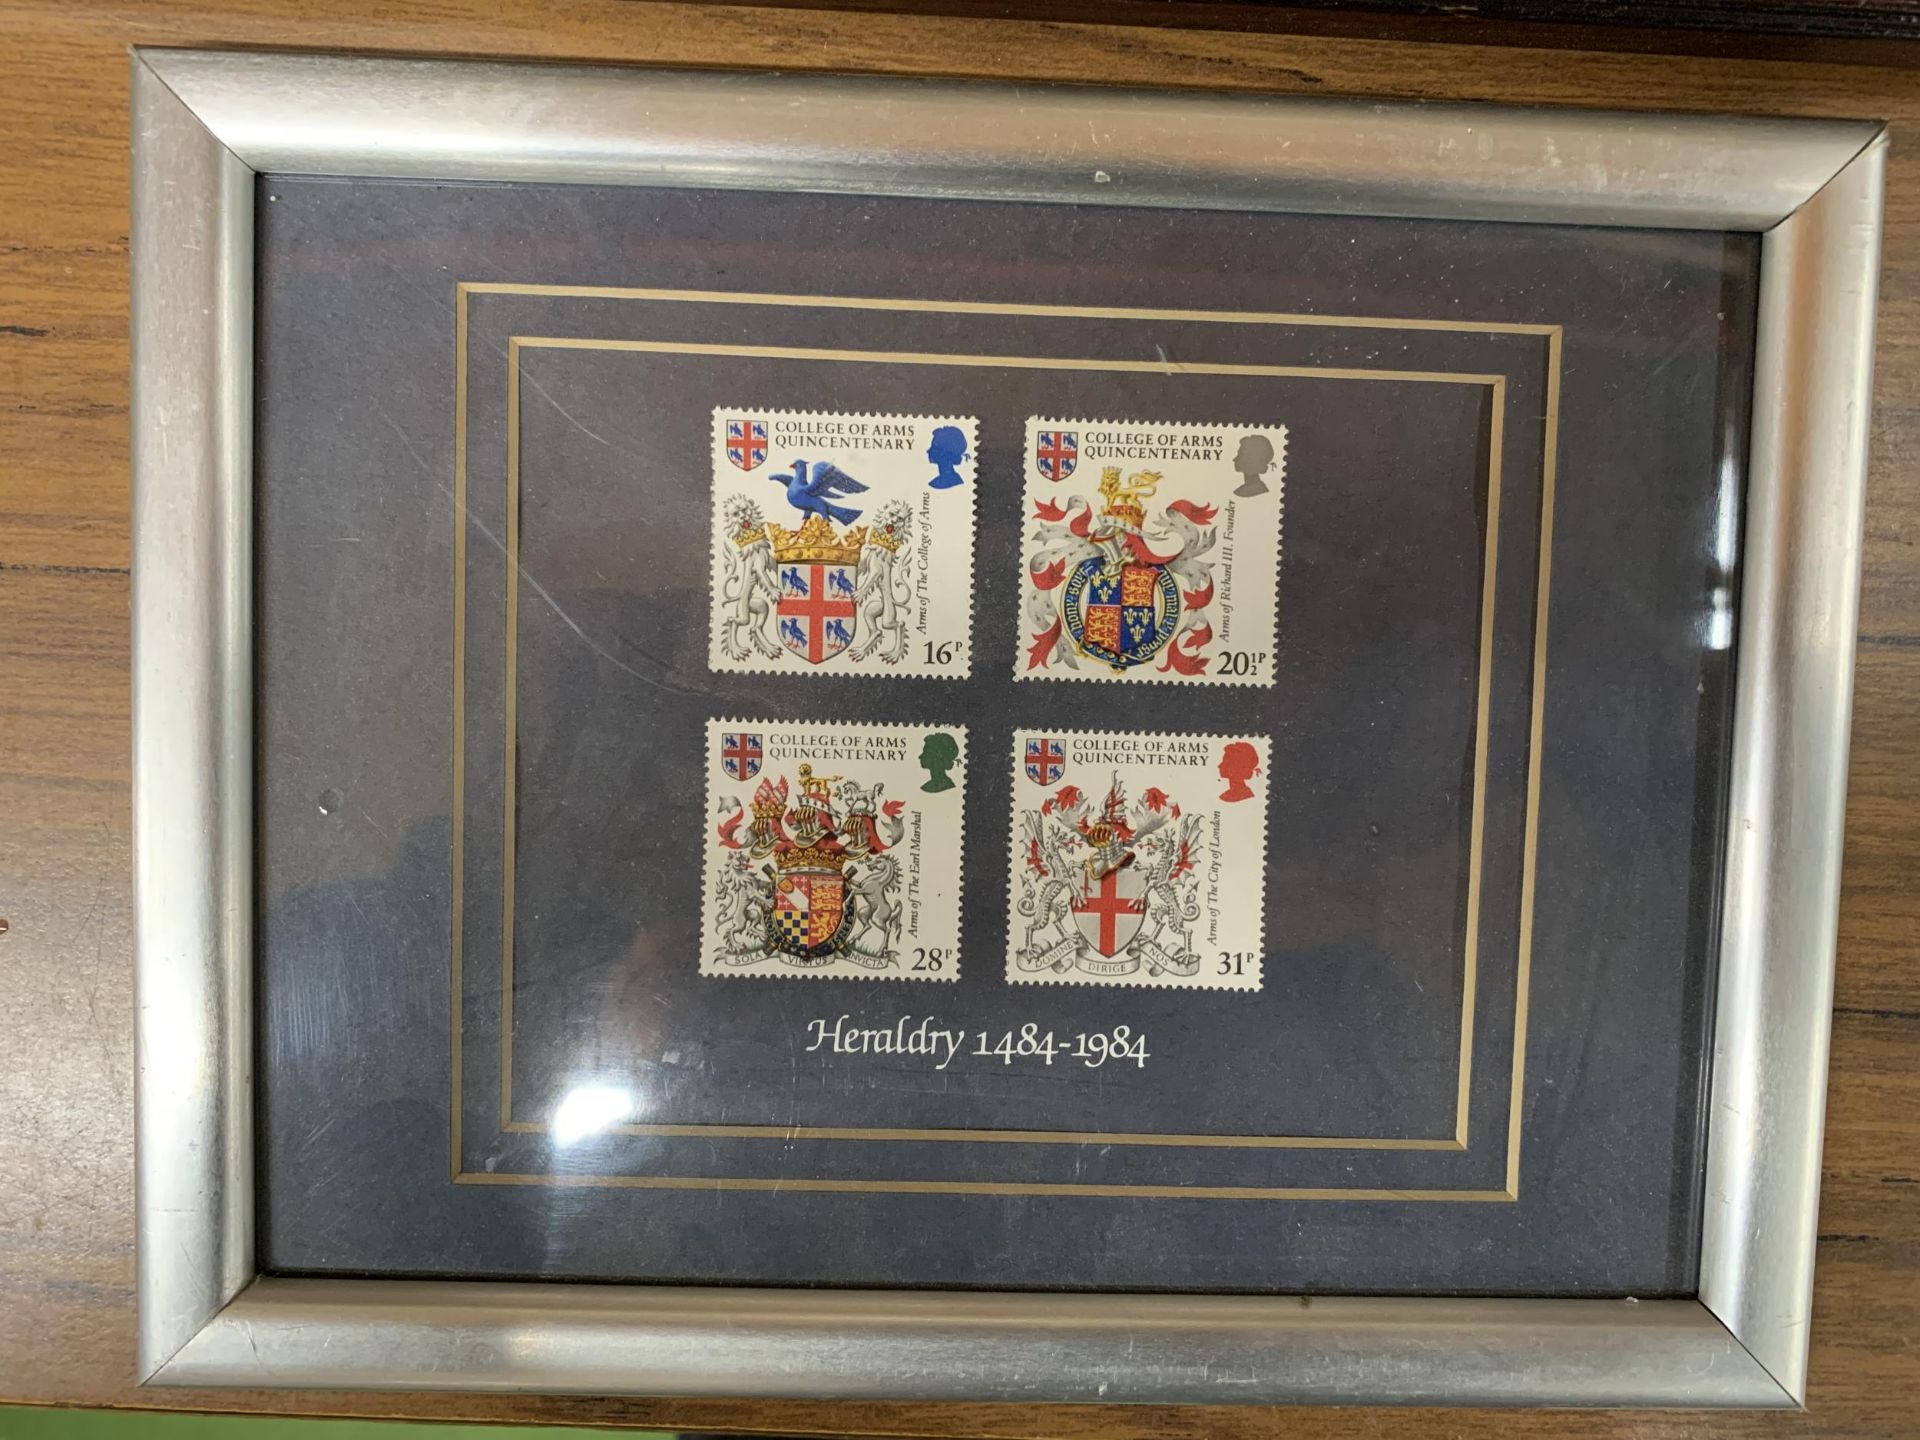 TWO FRAMED FAMILY HISTORY DOCUMENTS FOR THE NAME 'ELKINS' PLUS A SET OF FOUR HERALDRY STAMPS - Image 4 of 4